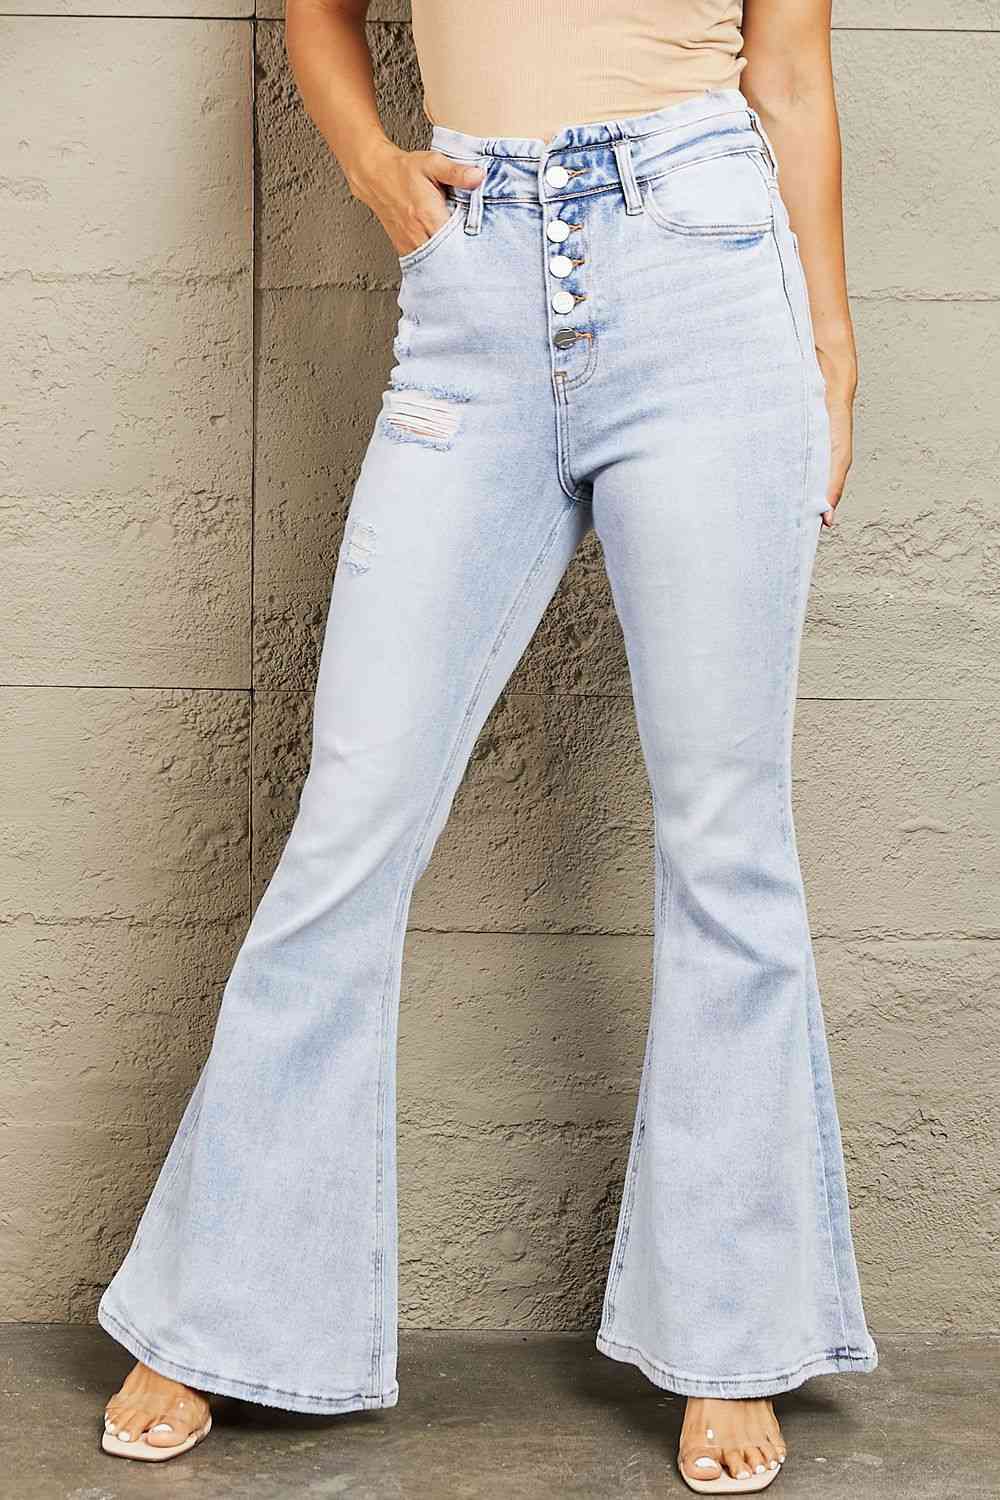 BAYEAS High Waisted Button Fly Flare Jeans Jeans Trendsi Light 22 